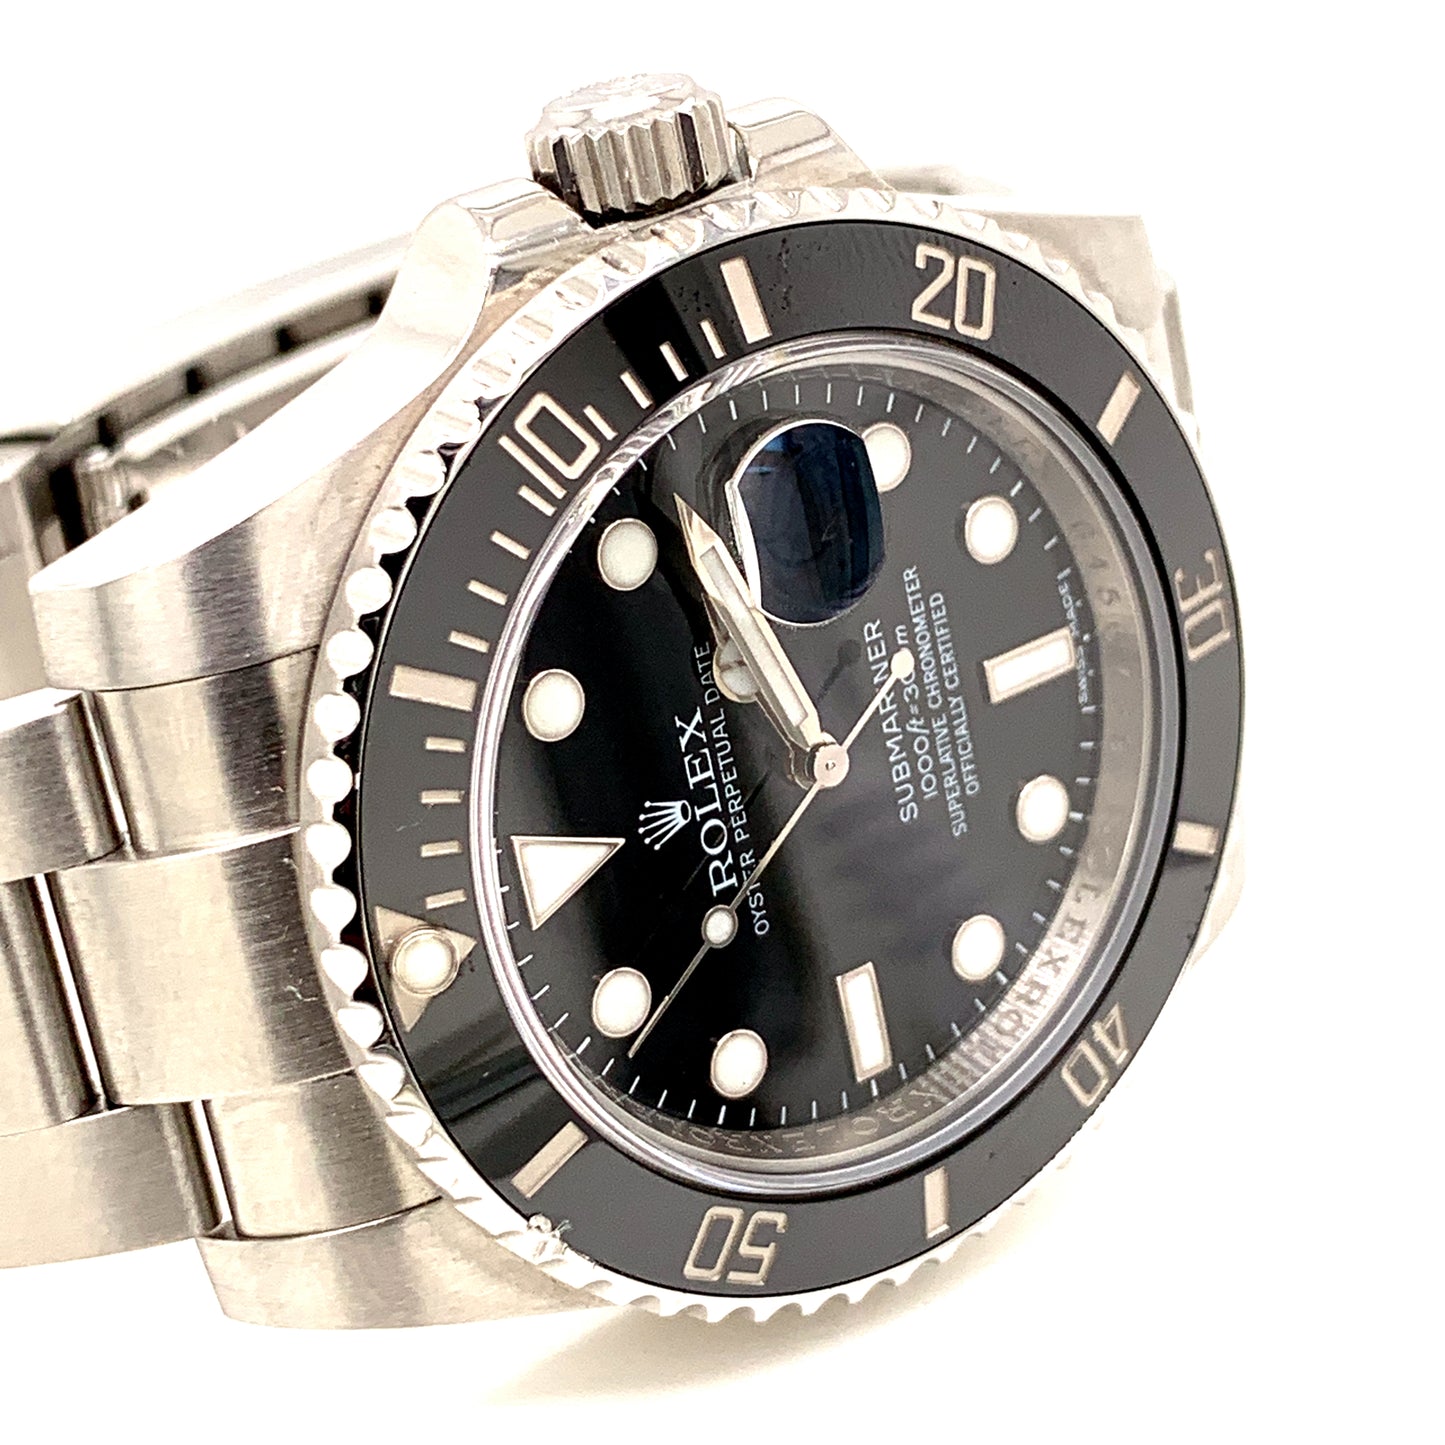 Rolex 116610LN Stainless Steel Submariner 40mm Black Dial Ceramic Box and Papers